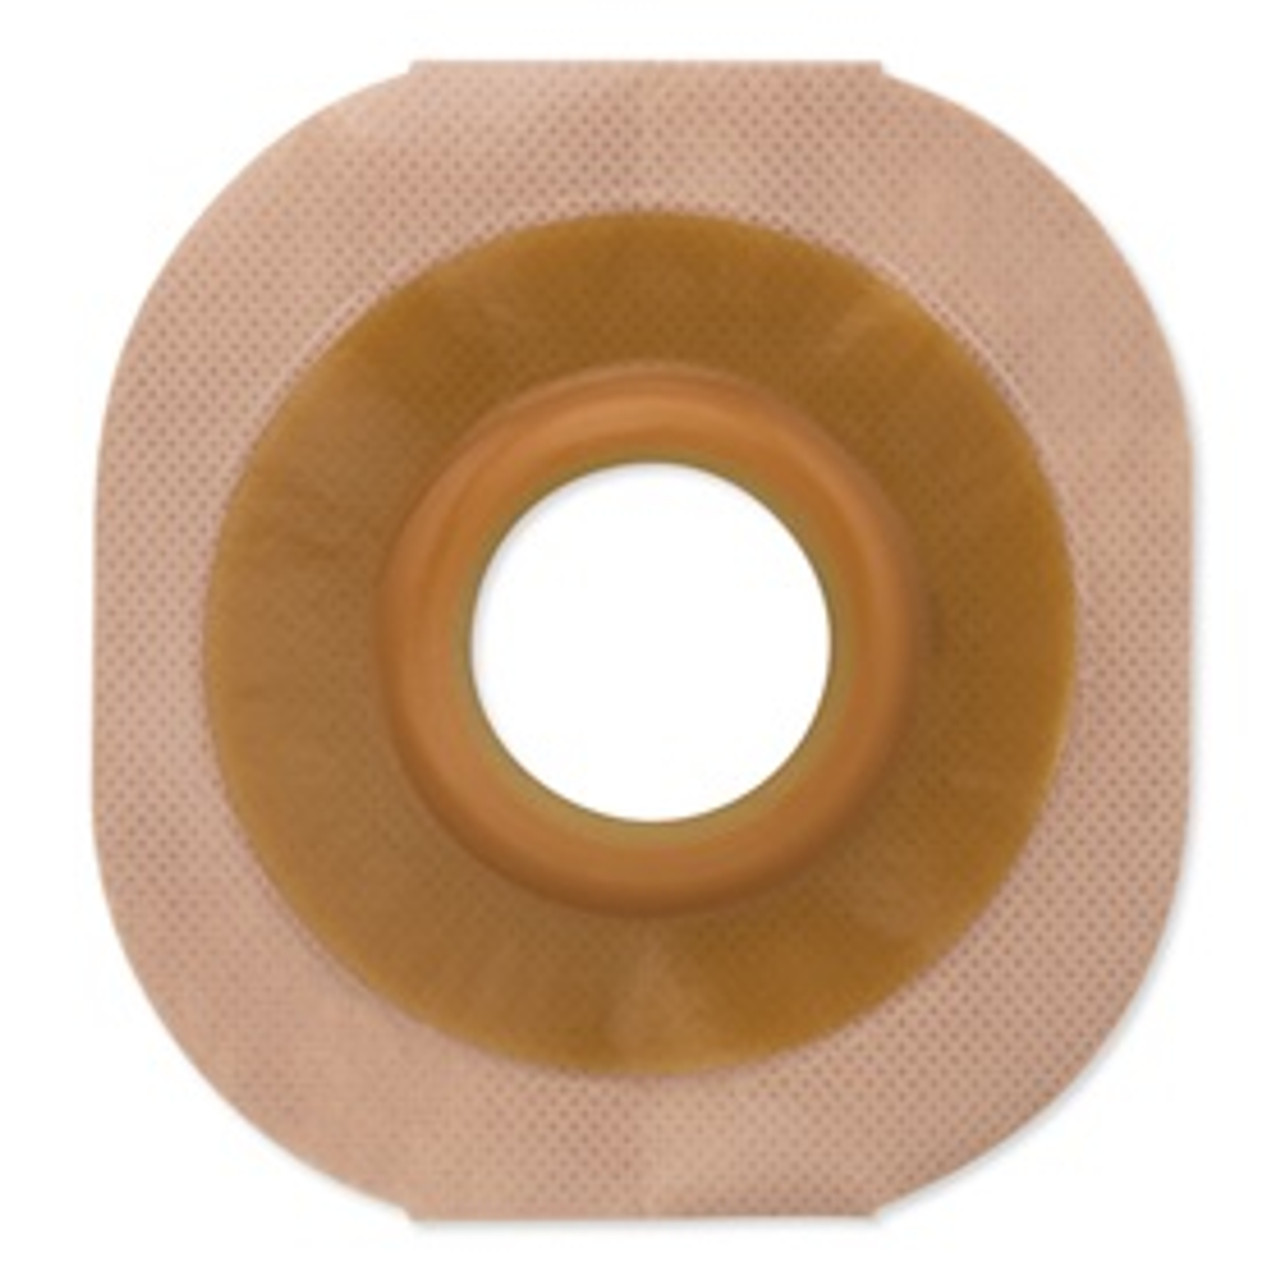 Hollister 13906 BX/5 NEW IMAGE FLEXTEND CONVEX SKIN Barrier WITH TAPERED BORDER, 2 1/4" (57MM) FLANGE, PRE-CUT 1 1/4" (32MM)